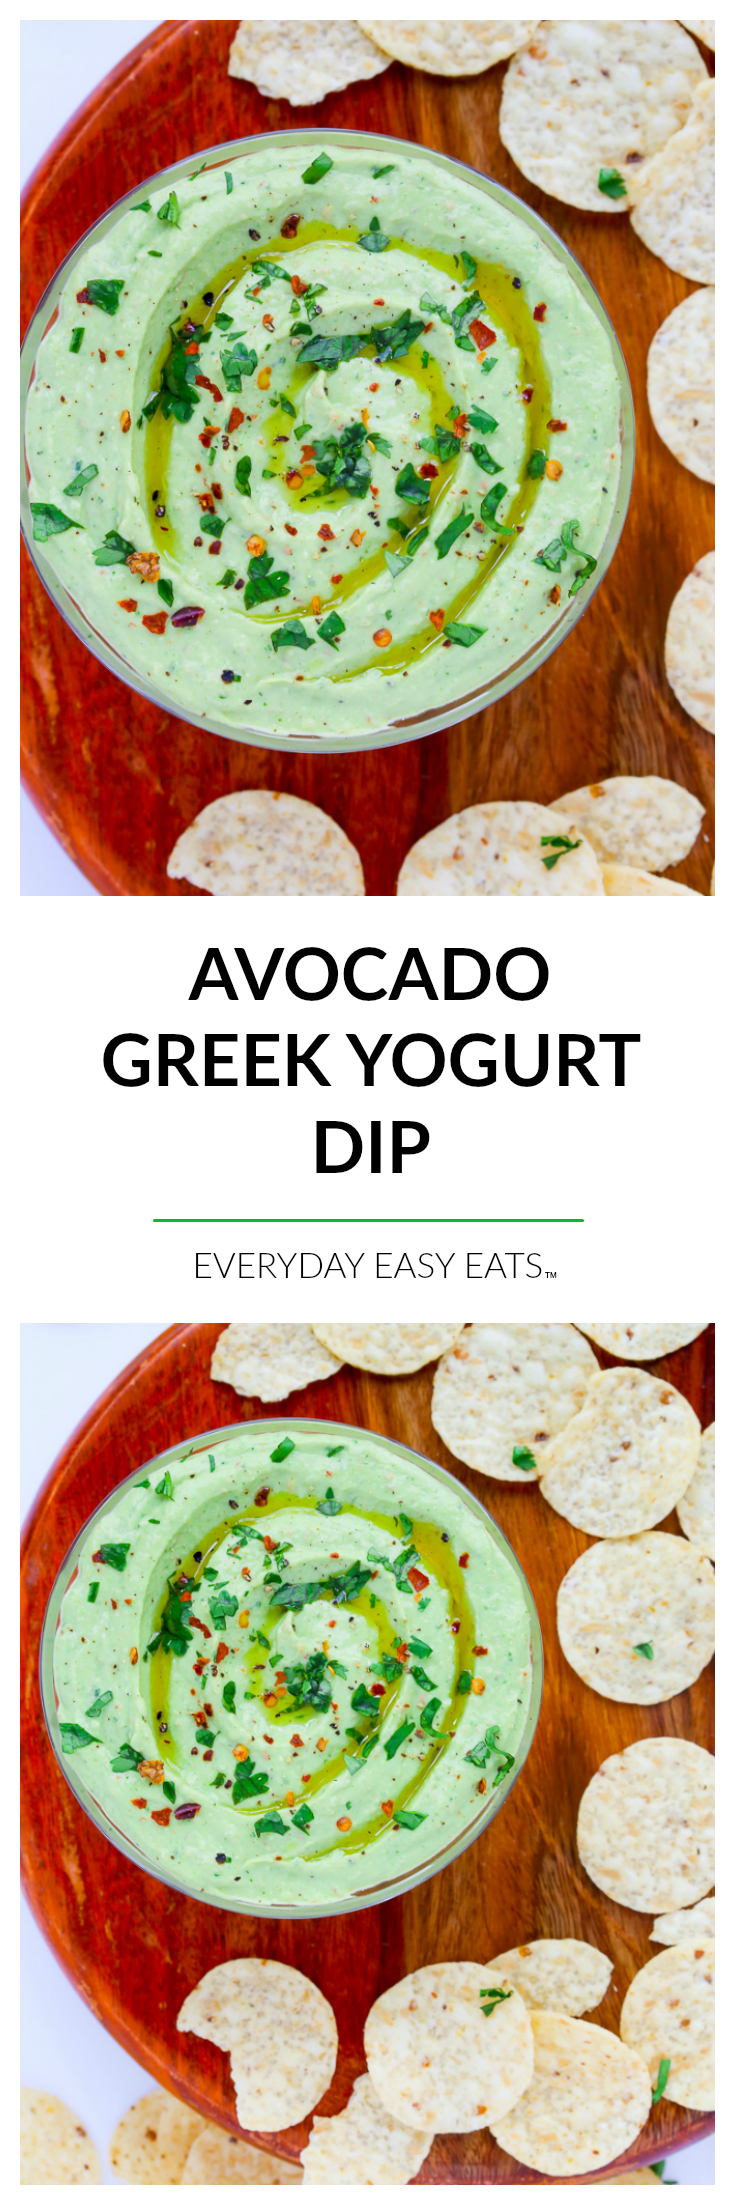 Avocado Greek Yogurt Dip - This creamy, healthy dip is perfect for entertaining and snacking. | EverydayEasyEats.com